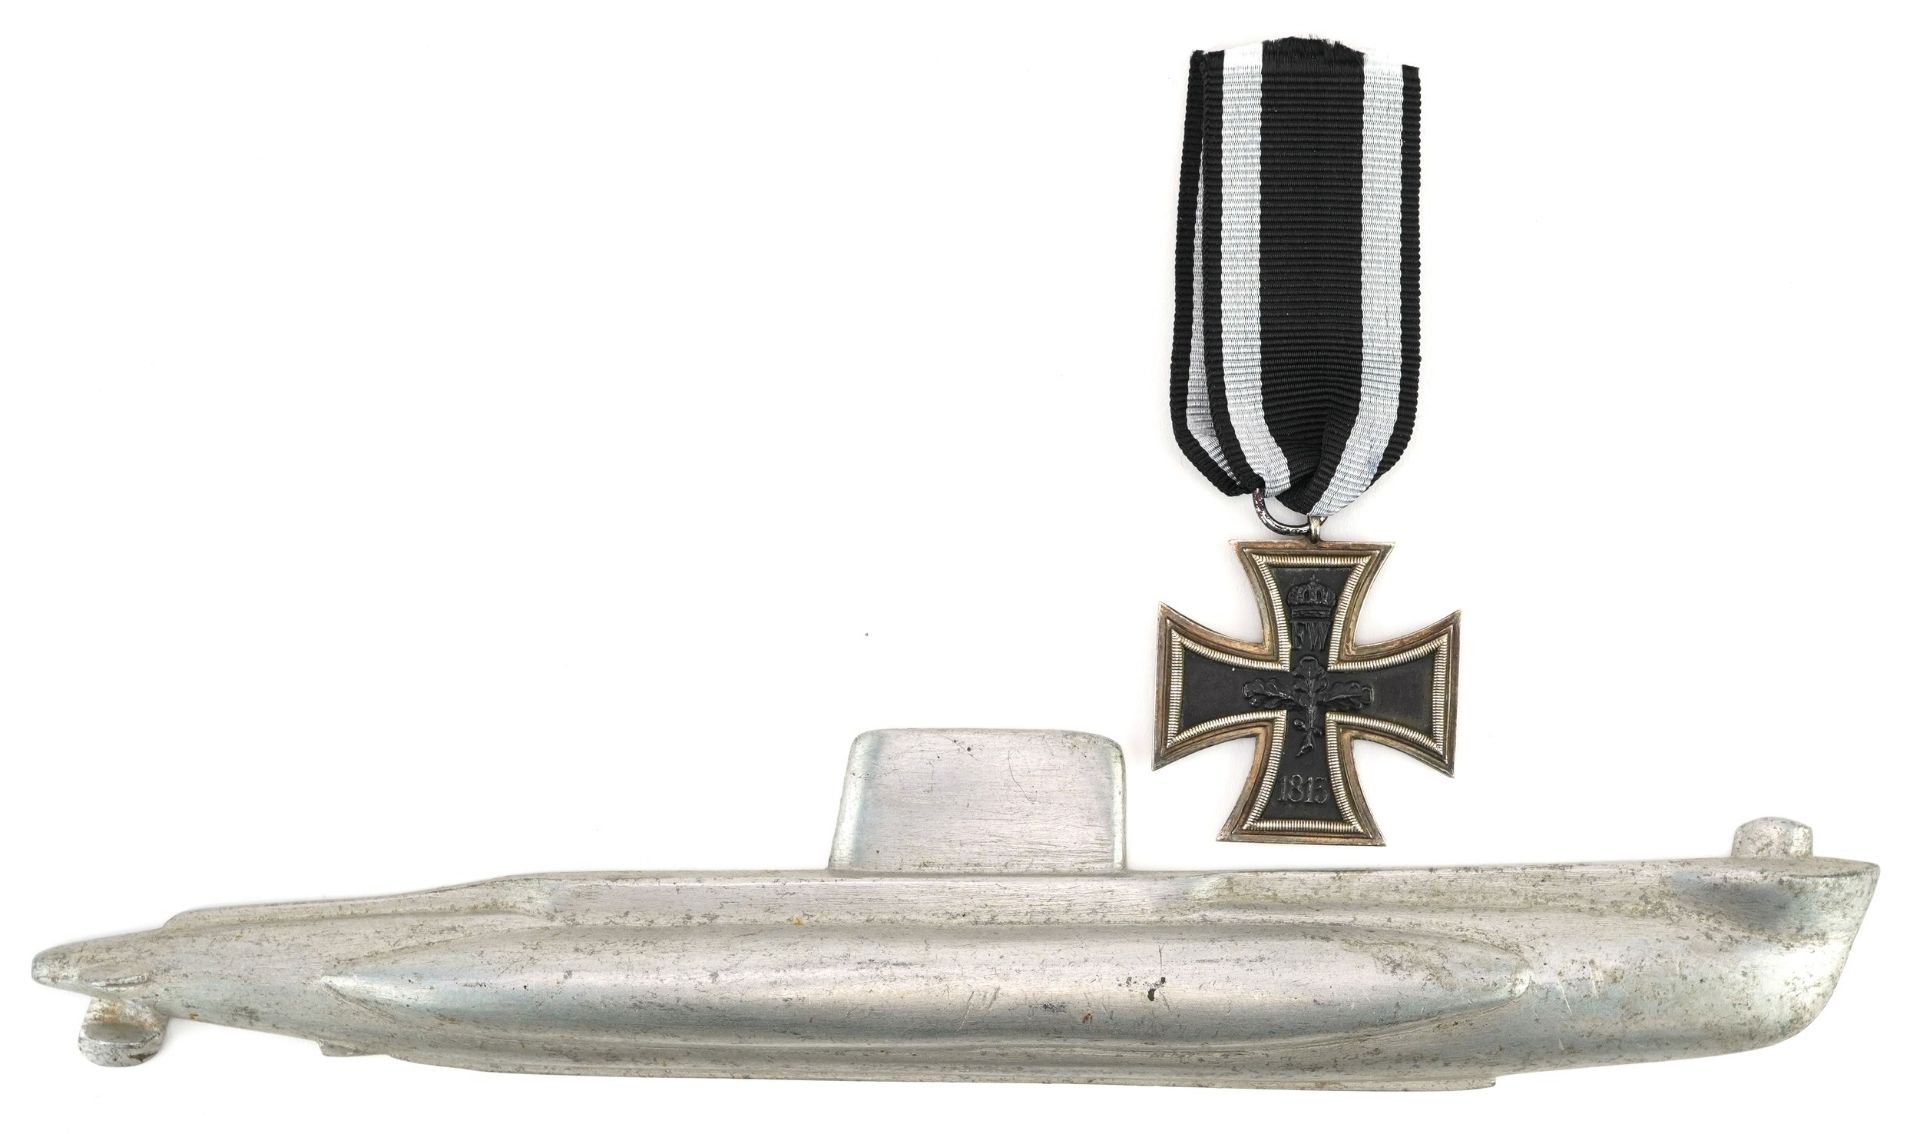 German military interest Iron Cross and a U-boat plaque